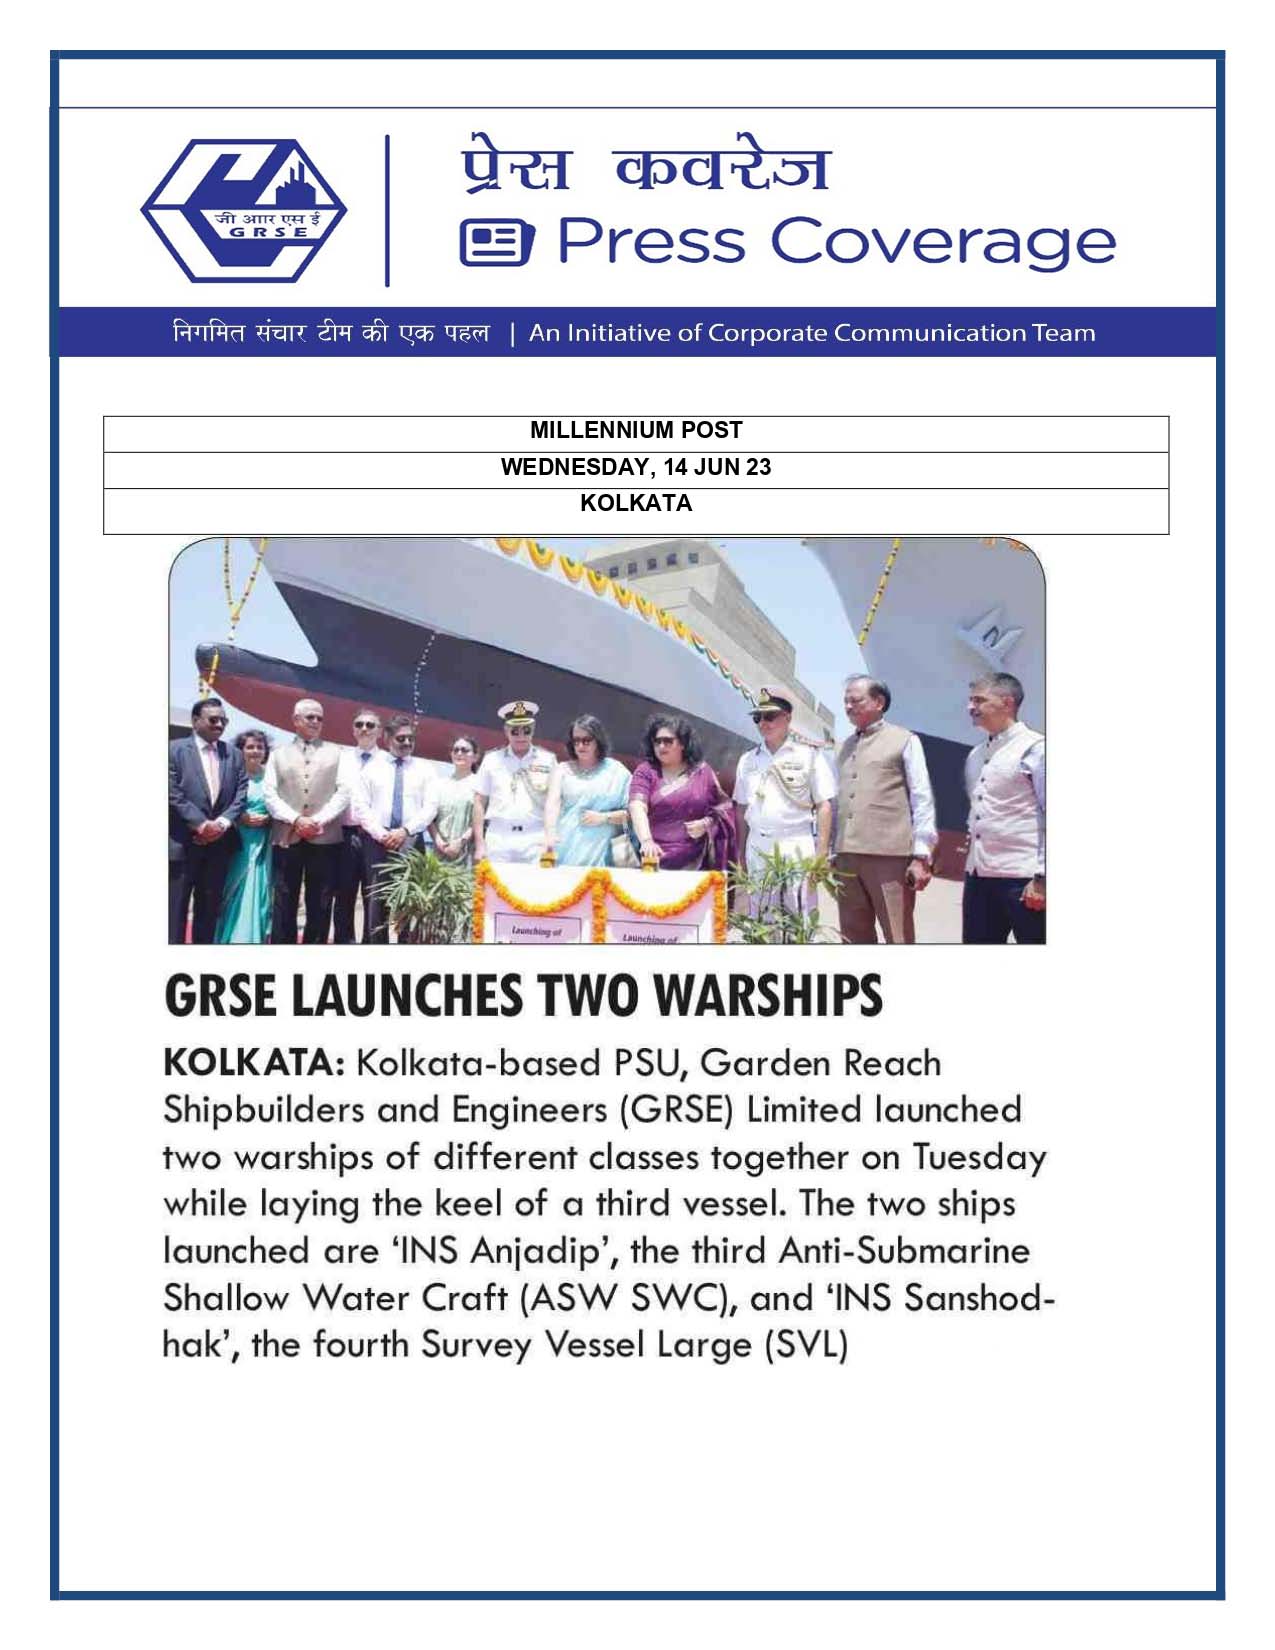 GRSE Launches Two Warships